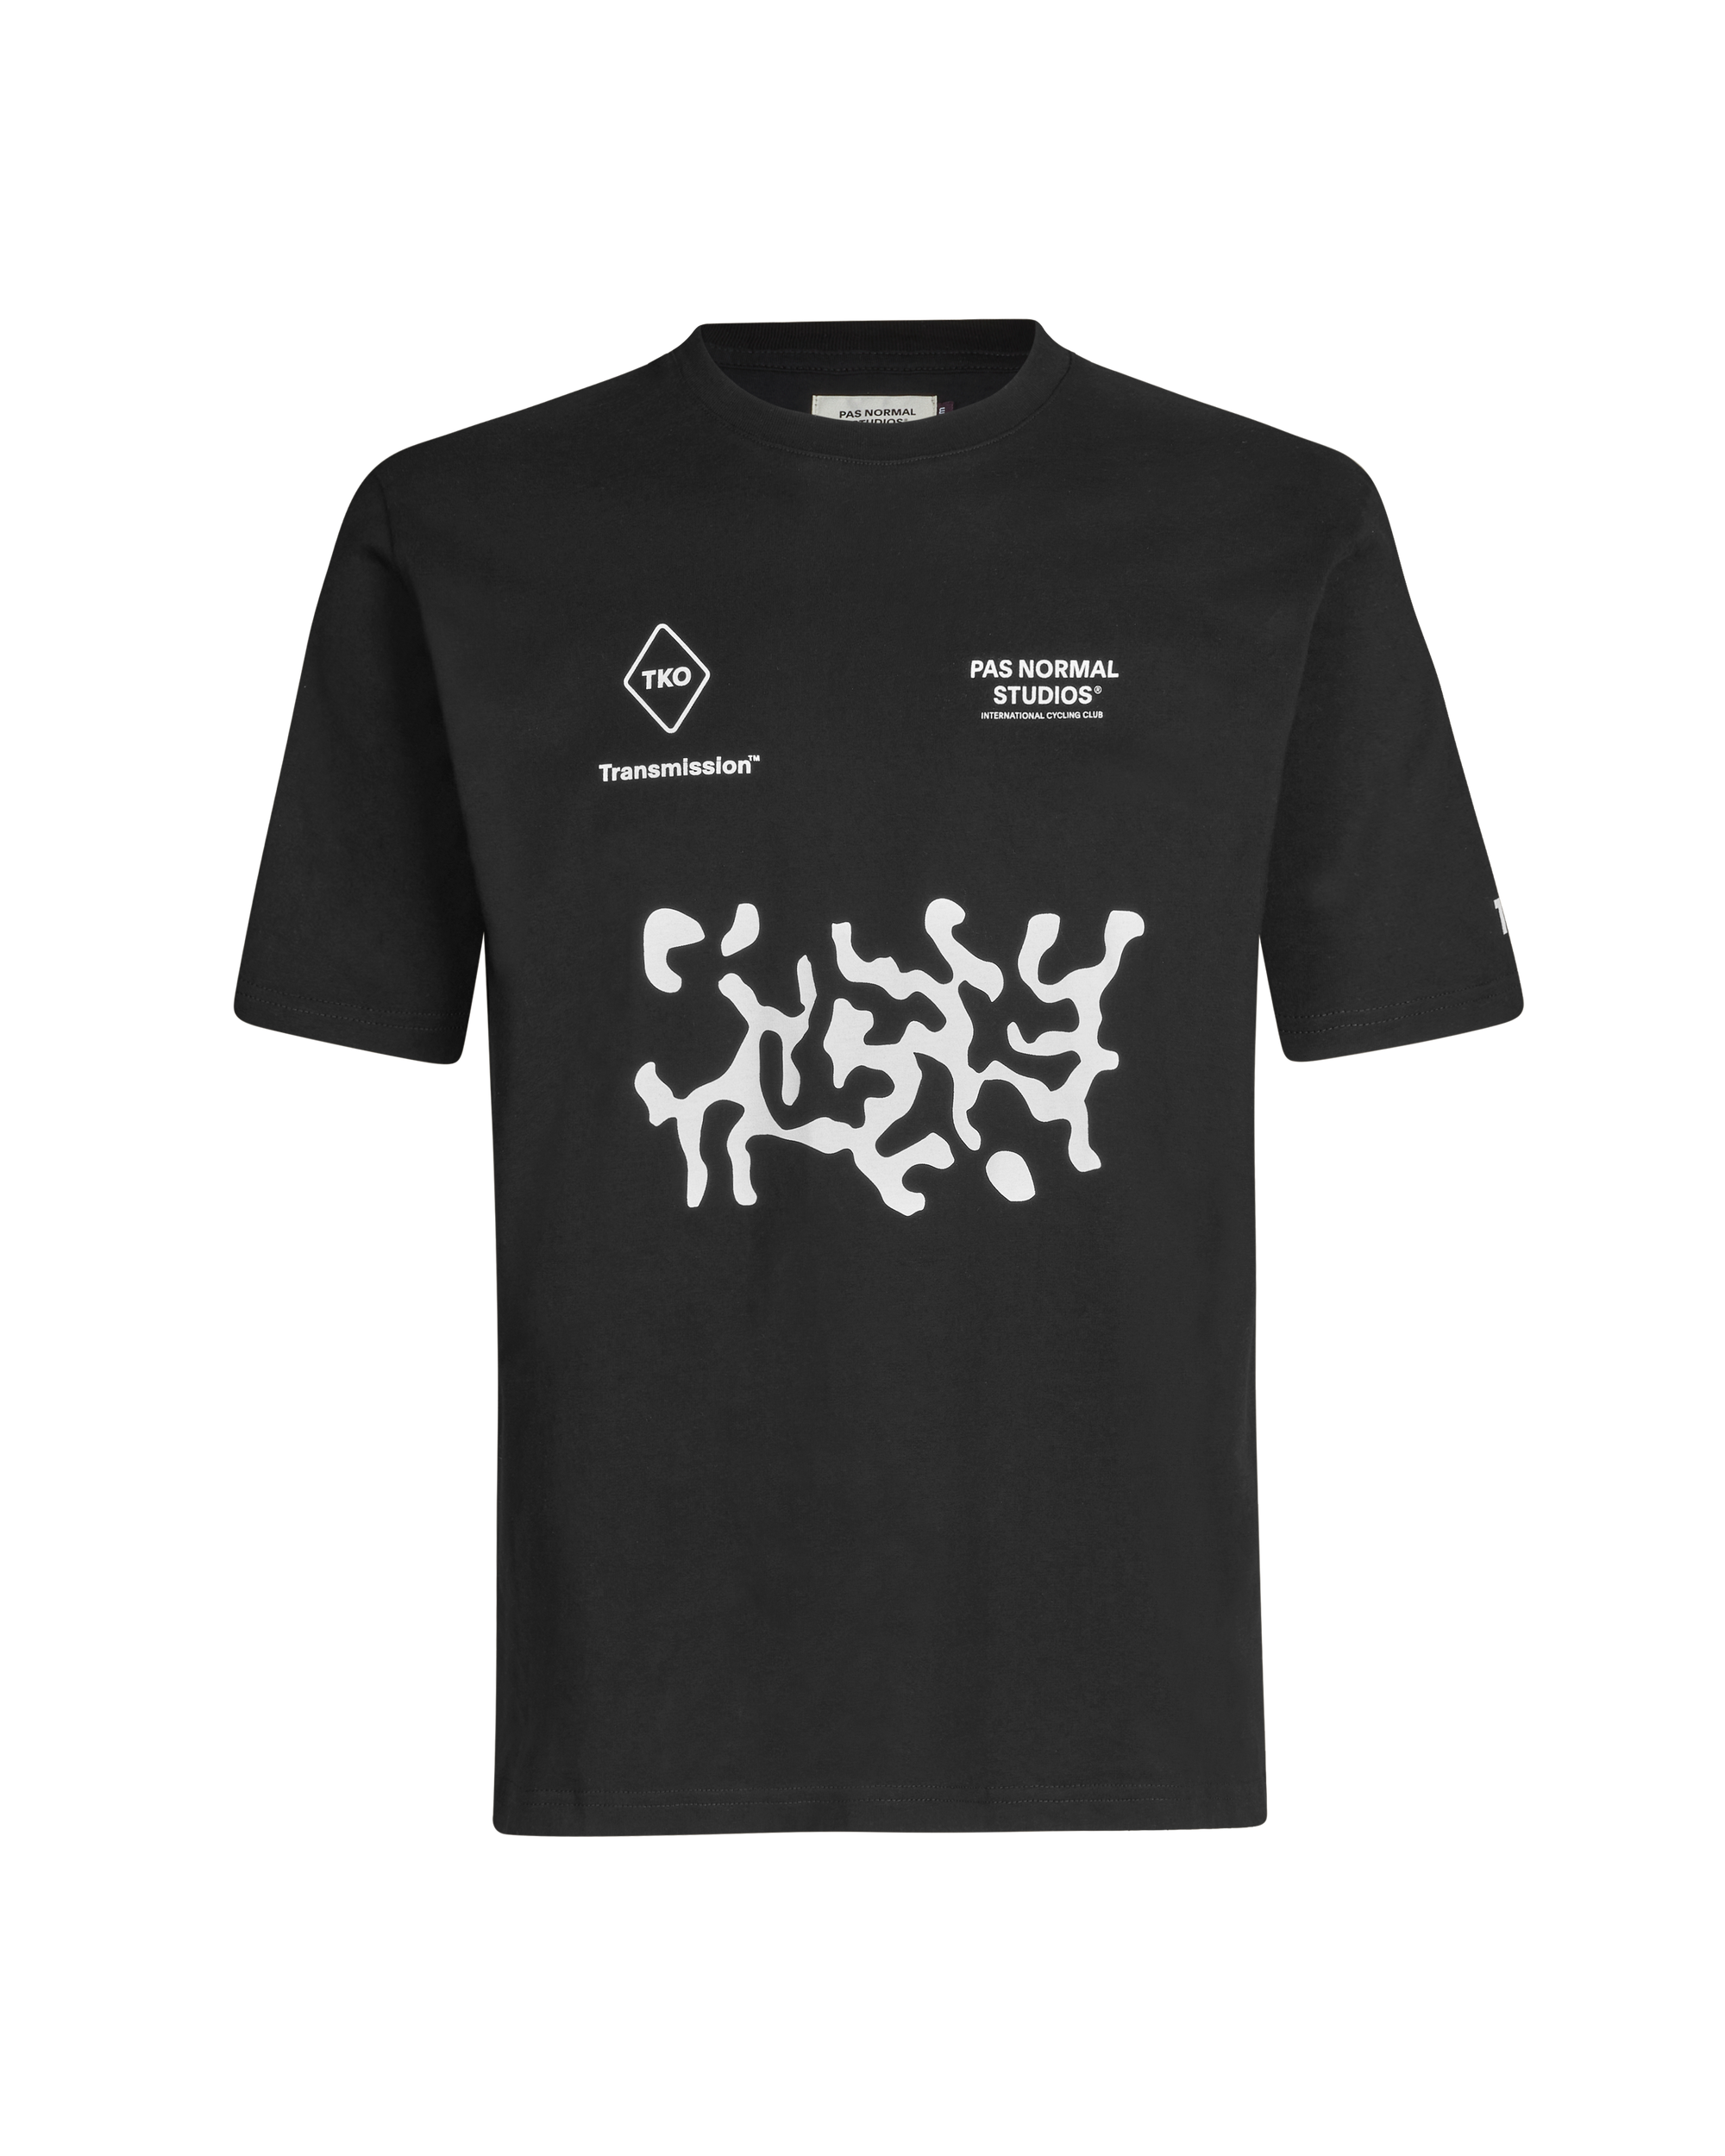 For Sale / Shimano MX Tee Shirt with FREE SHIPPING!